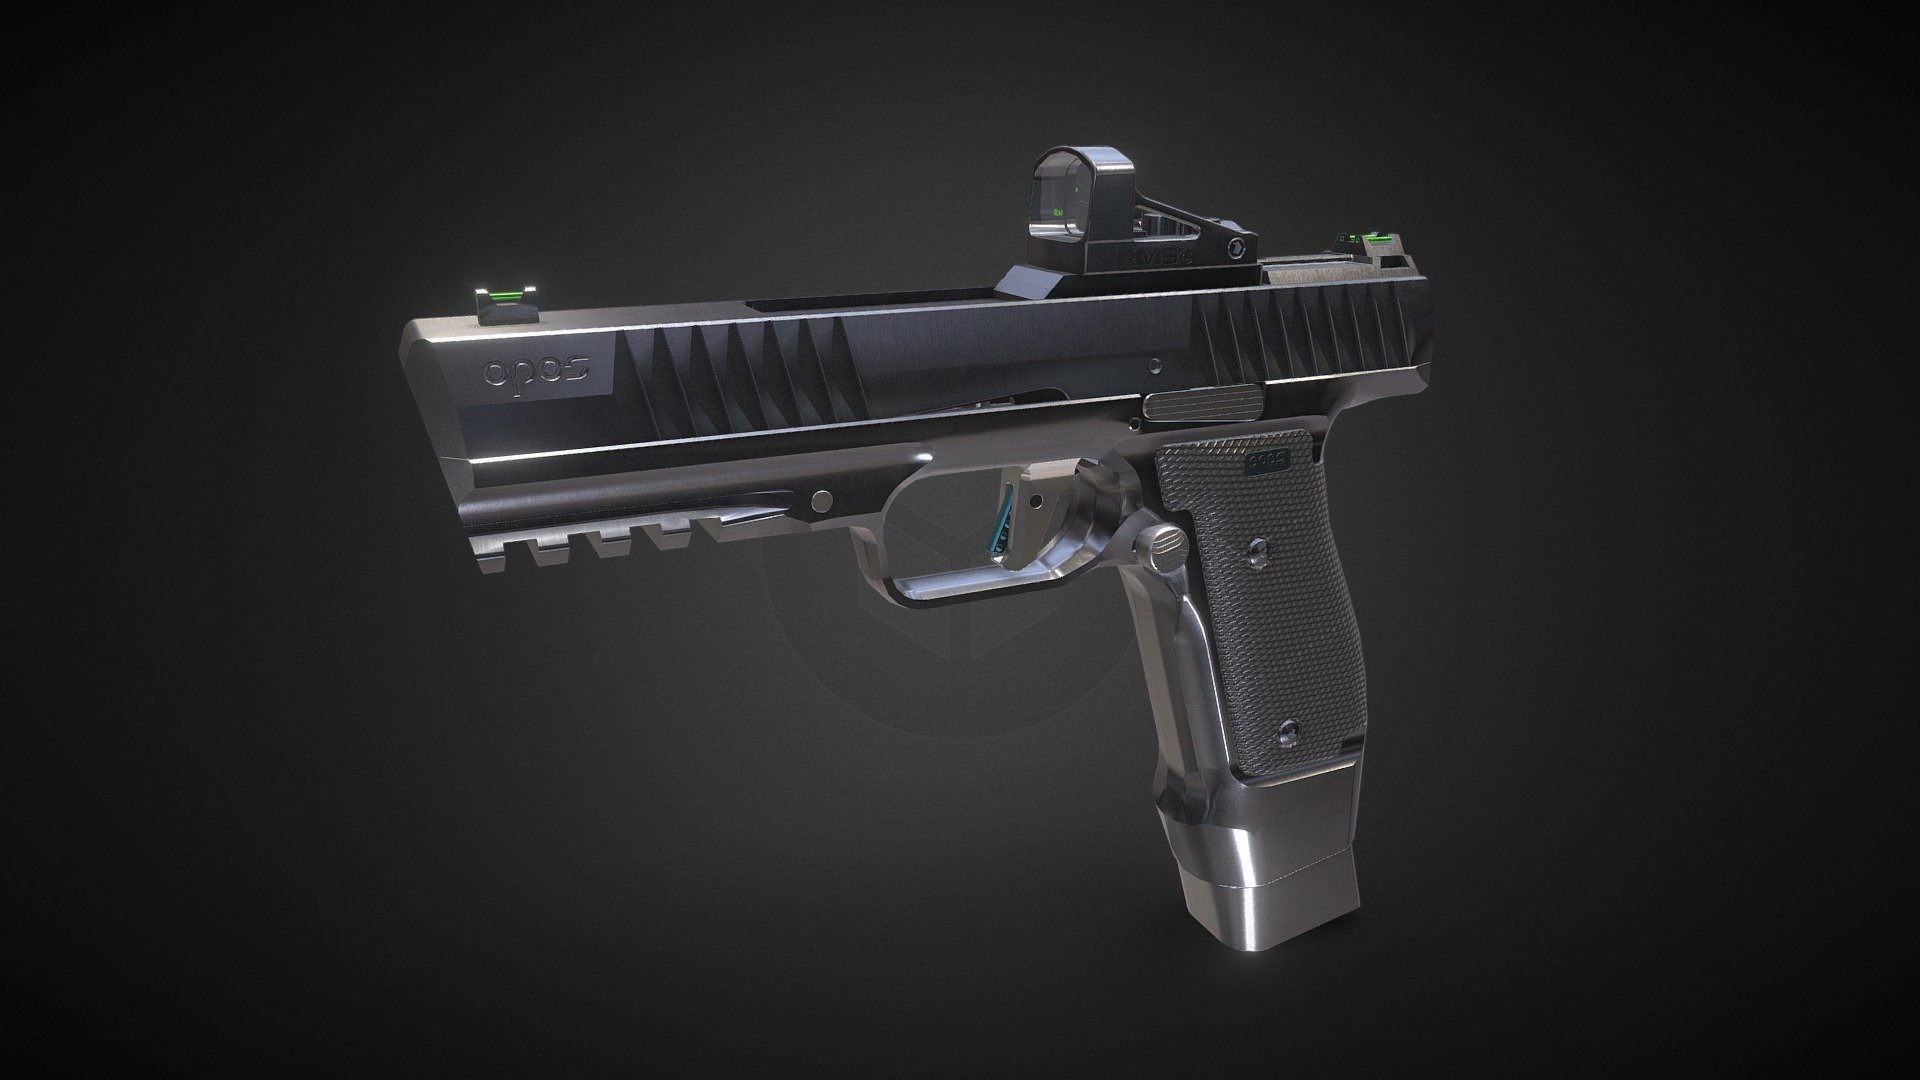 Opos Highend Gun, state of march 2023

This modern and high-end gun design features cutting edge technology and aims to revolutionize the hand-gun market. Besides customizability it features a display on the back to quickly assess the status of the gun with one quick look 3d model